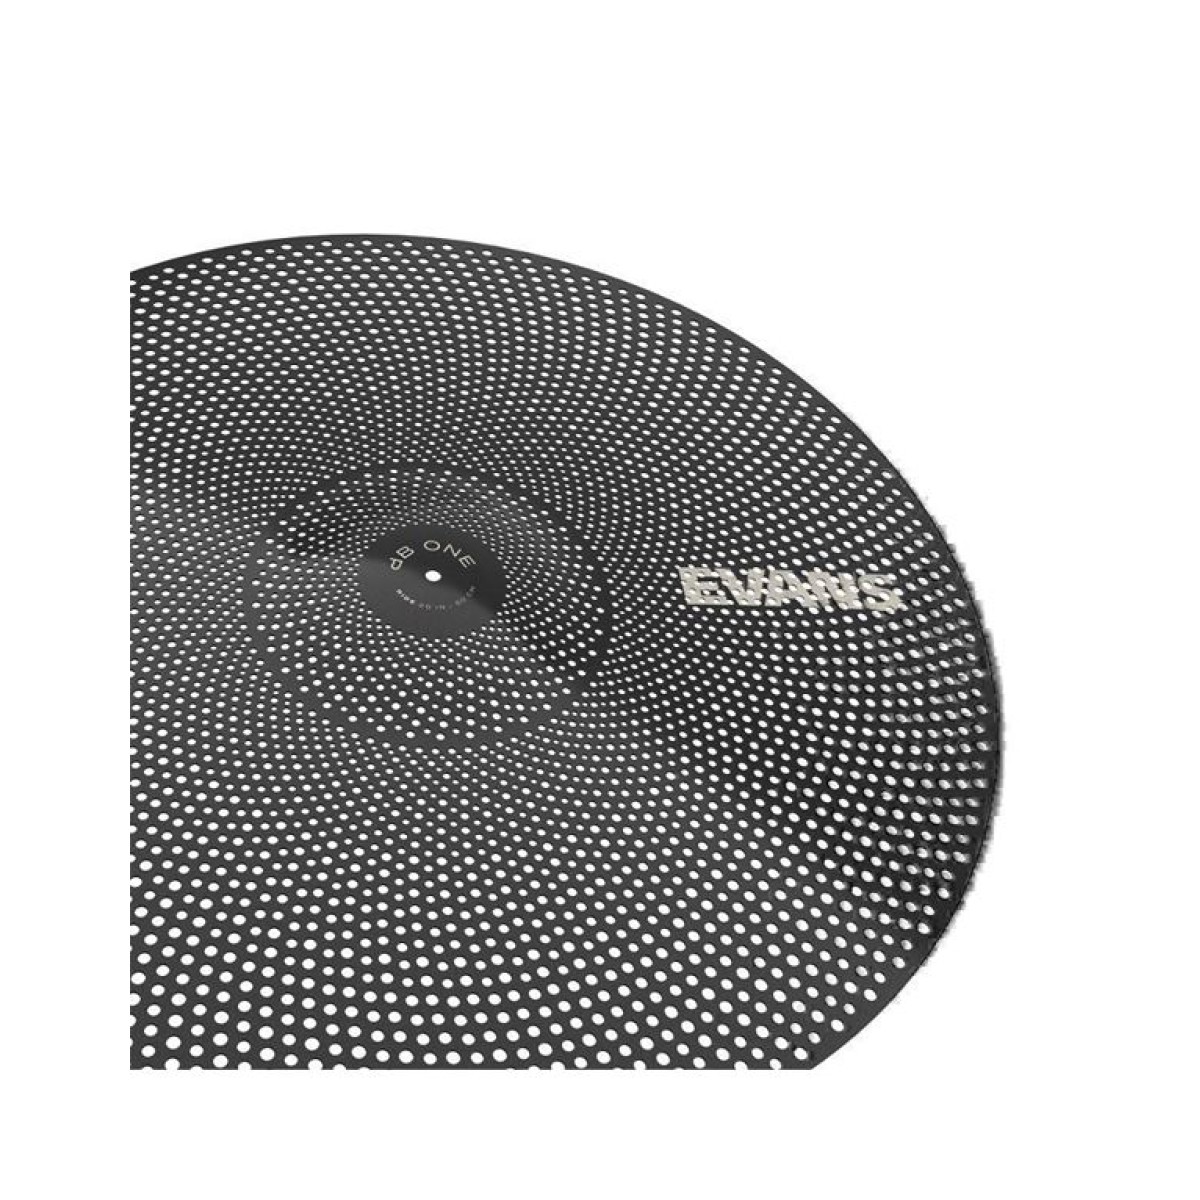 EVANS ECP-DB-1 Low Volume Cymbal Pack (14", 16", 18", 20") Πιατίνια Σετ